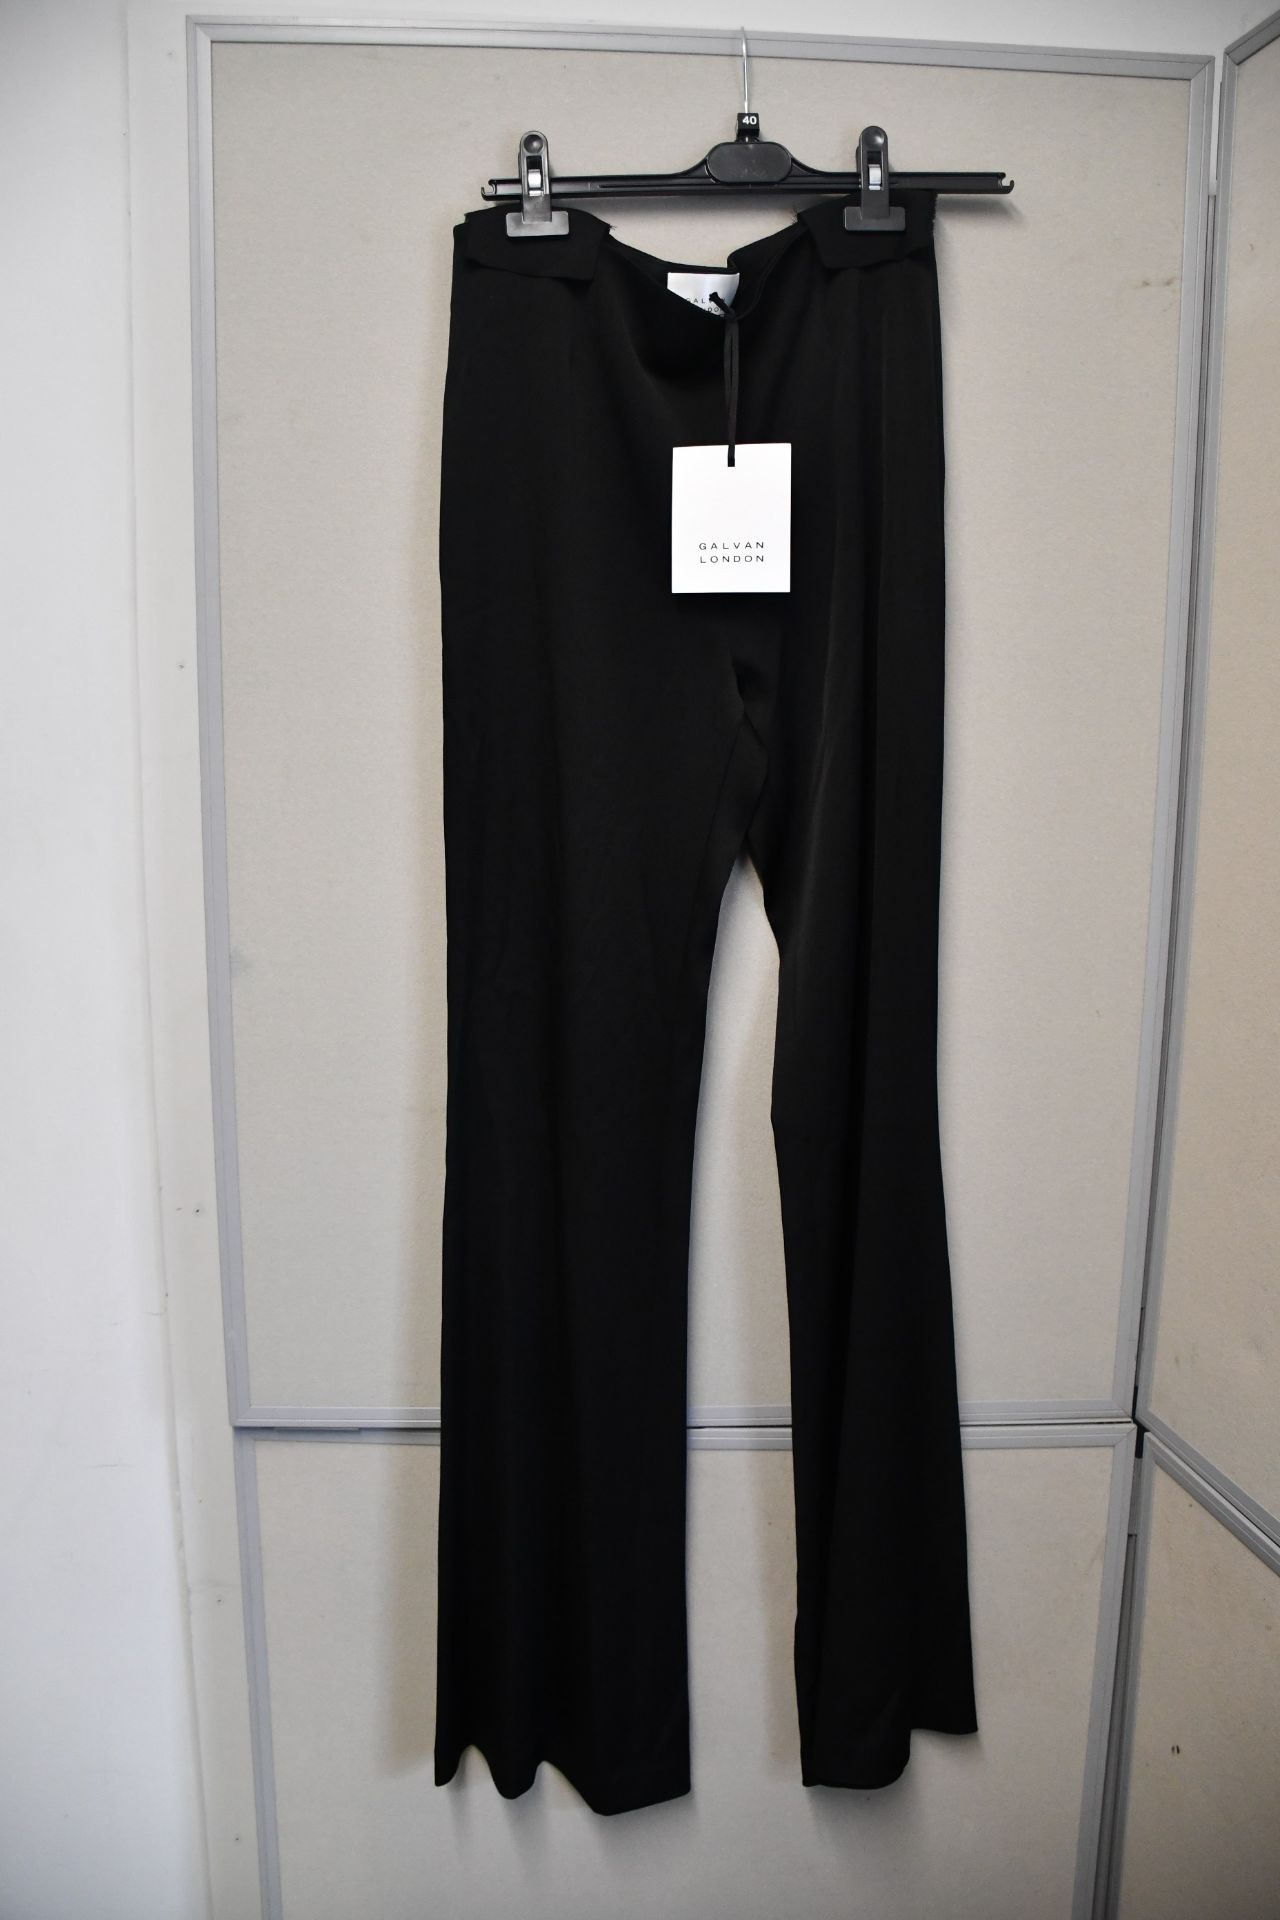 One as new Galvan London Satin Crepe high waisted satin black trousers size 42 (100COTR300201BK).